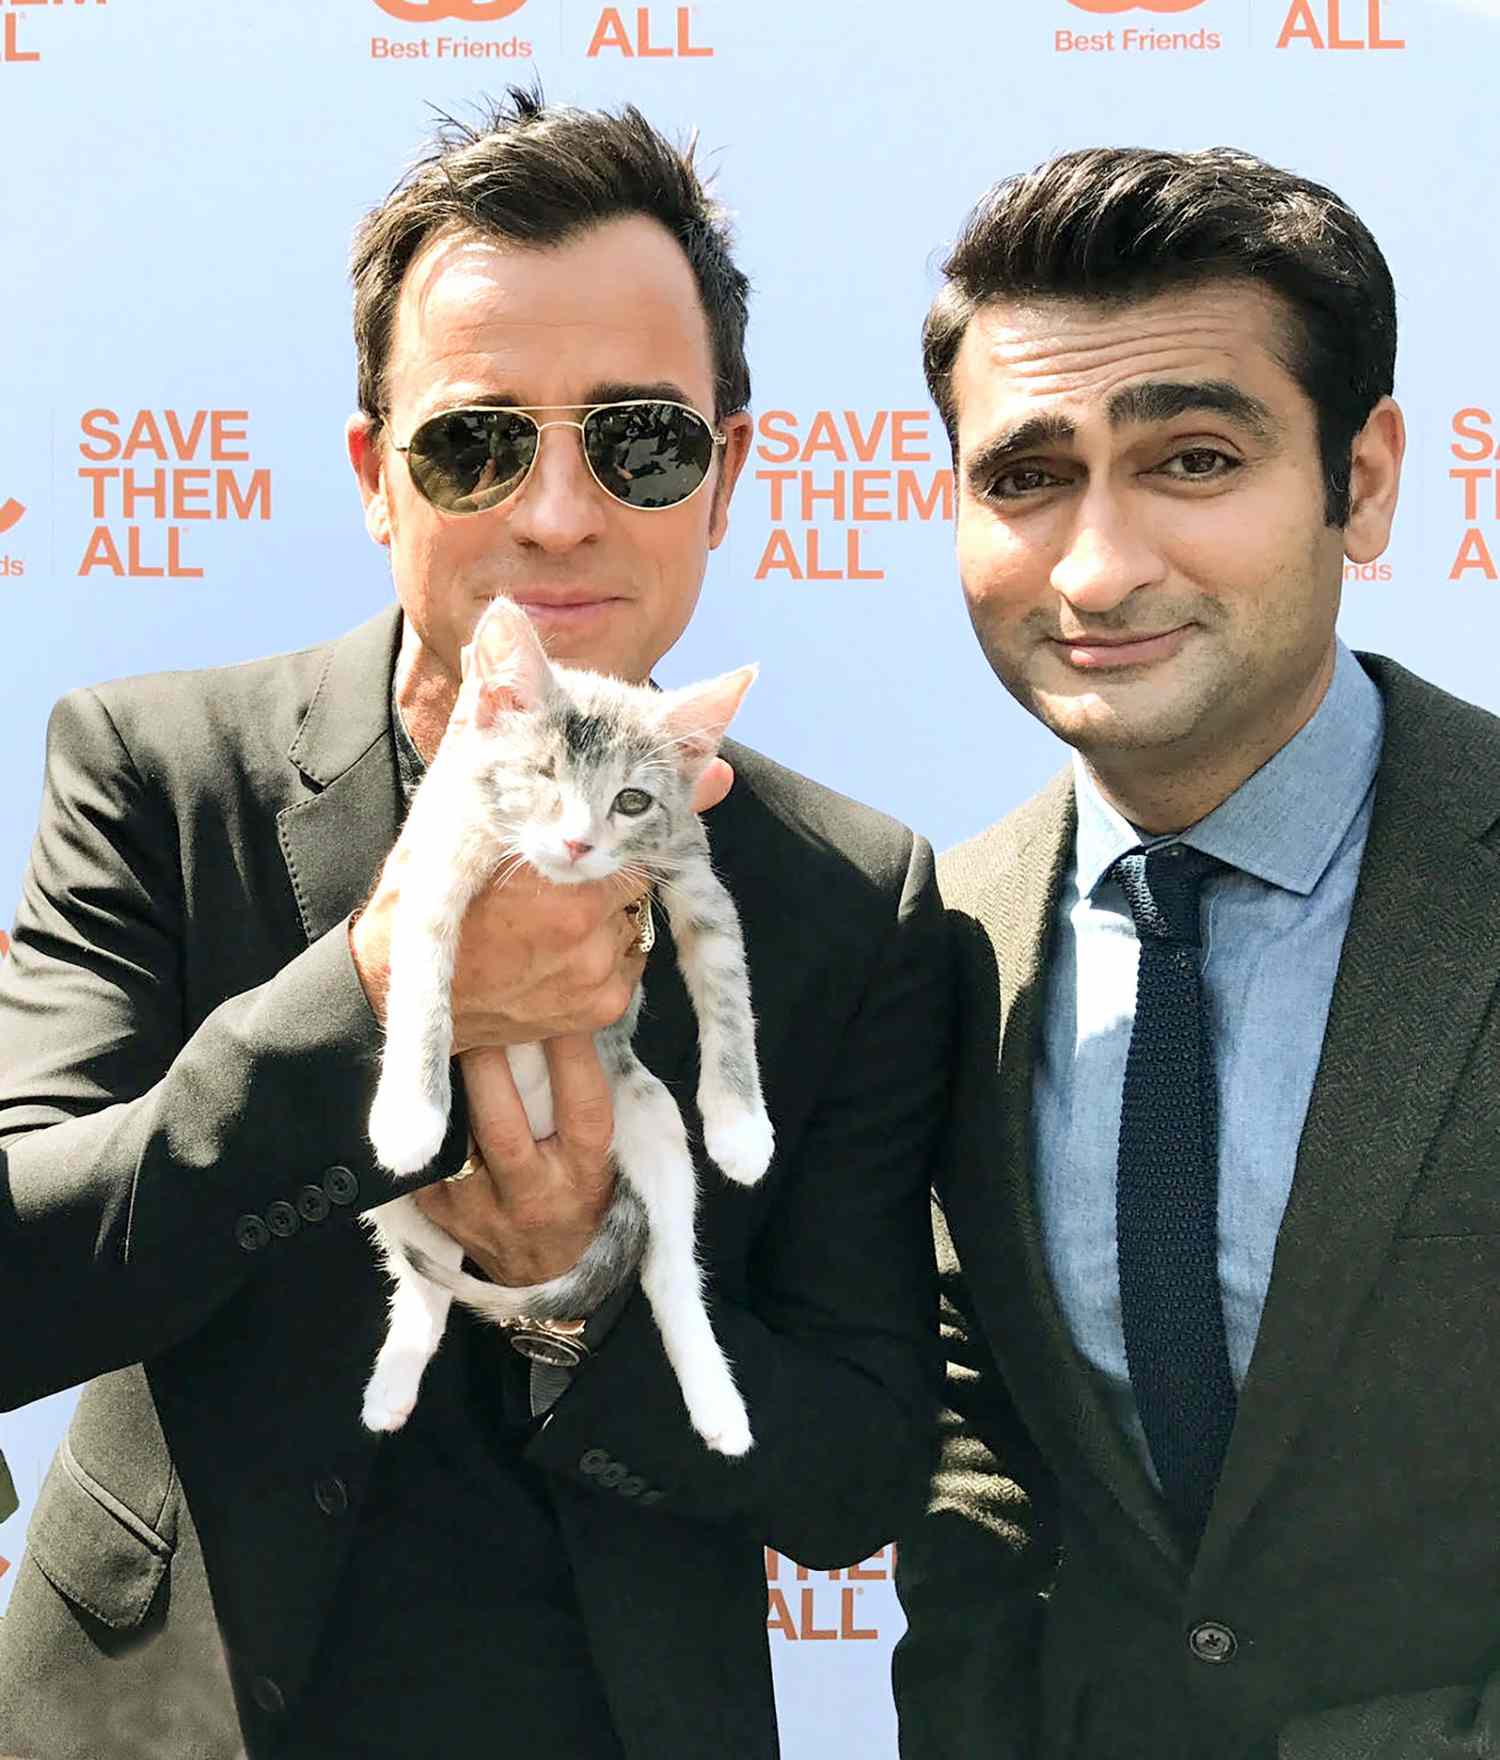 Justin Theroux and Kumail Nanjiani give us claws to smile